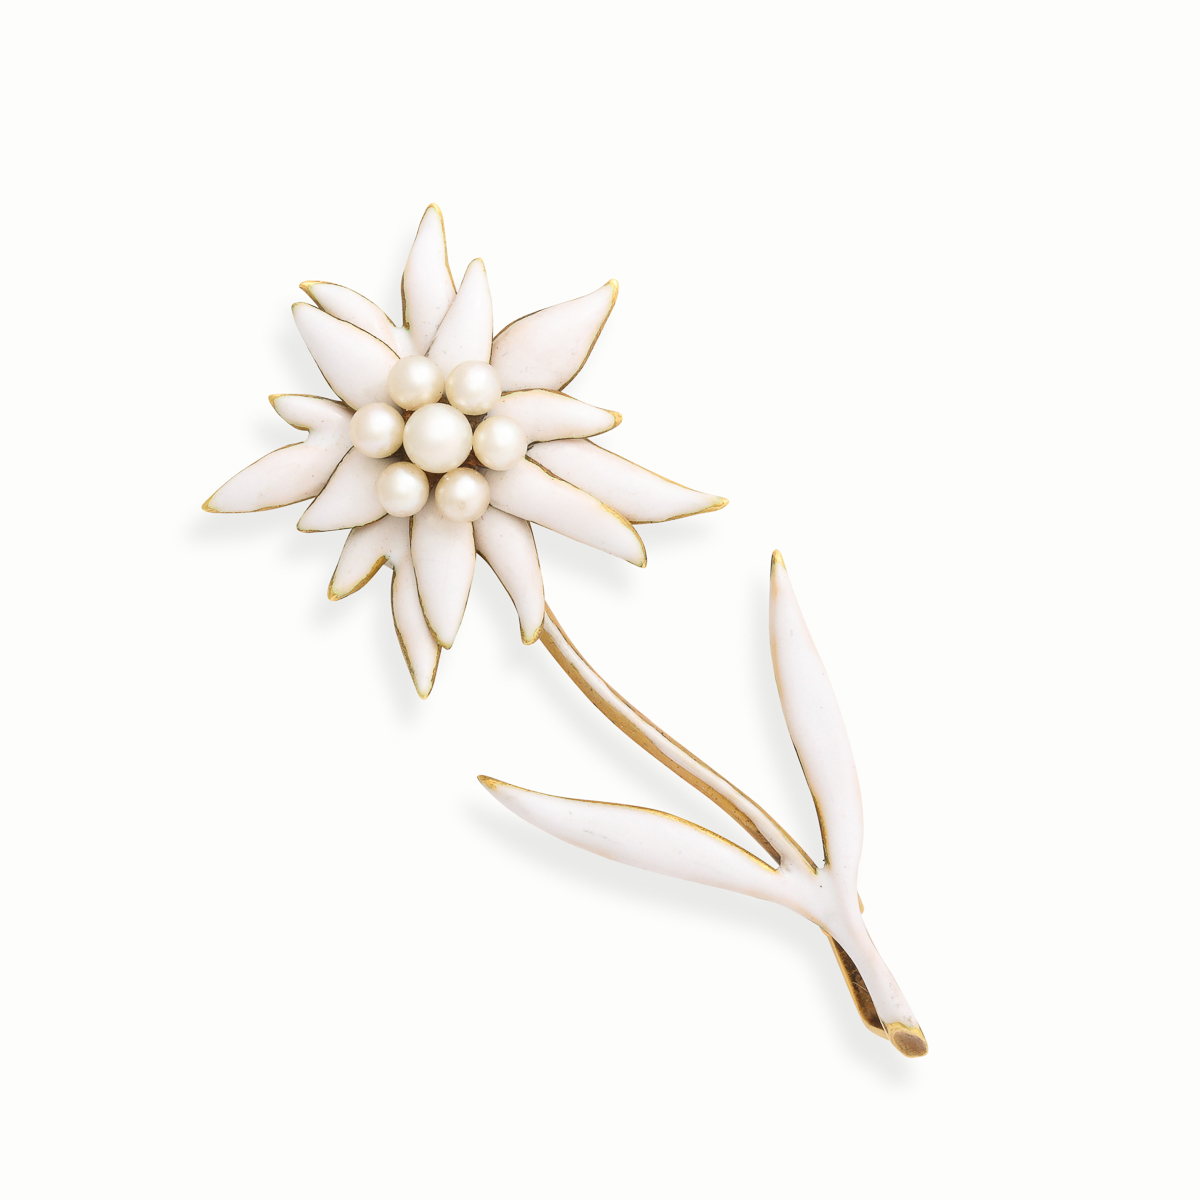 flower brooch designed as an Edelweiss flower with gold, white opaque enamel, and a cluster of natural pearls at the center